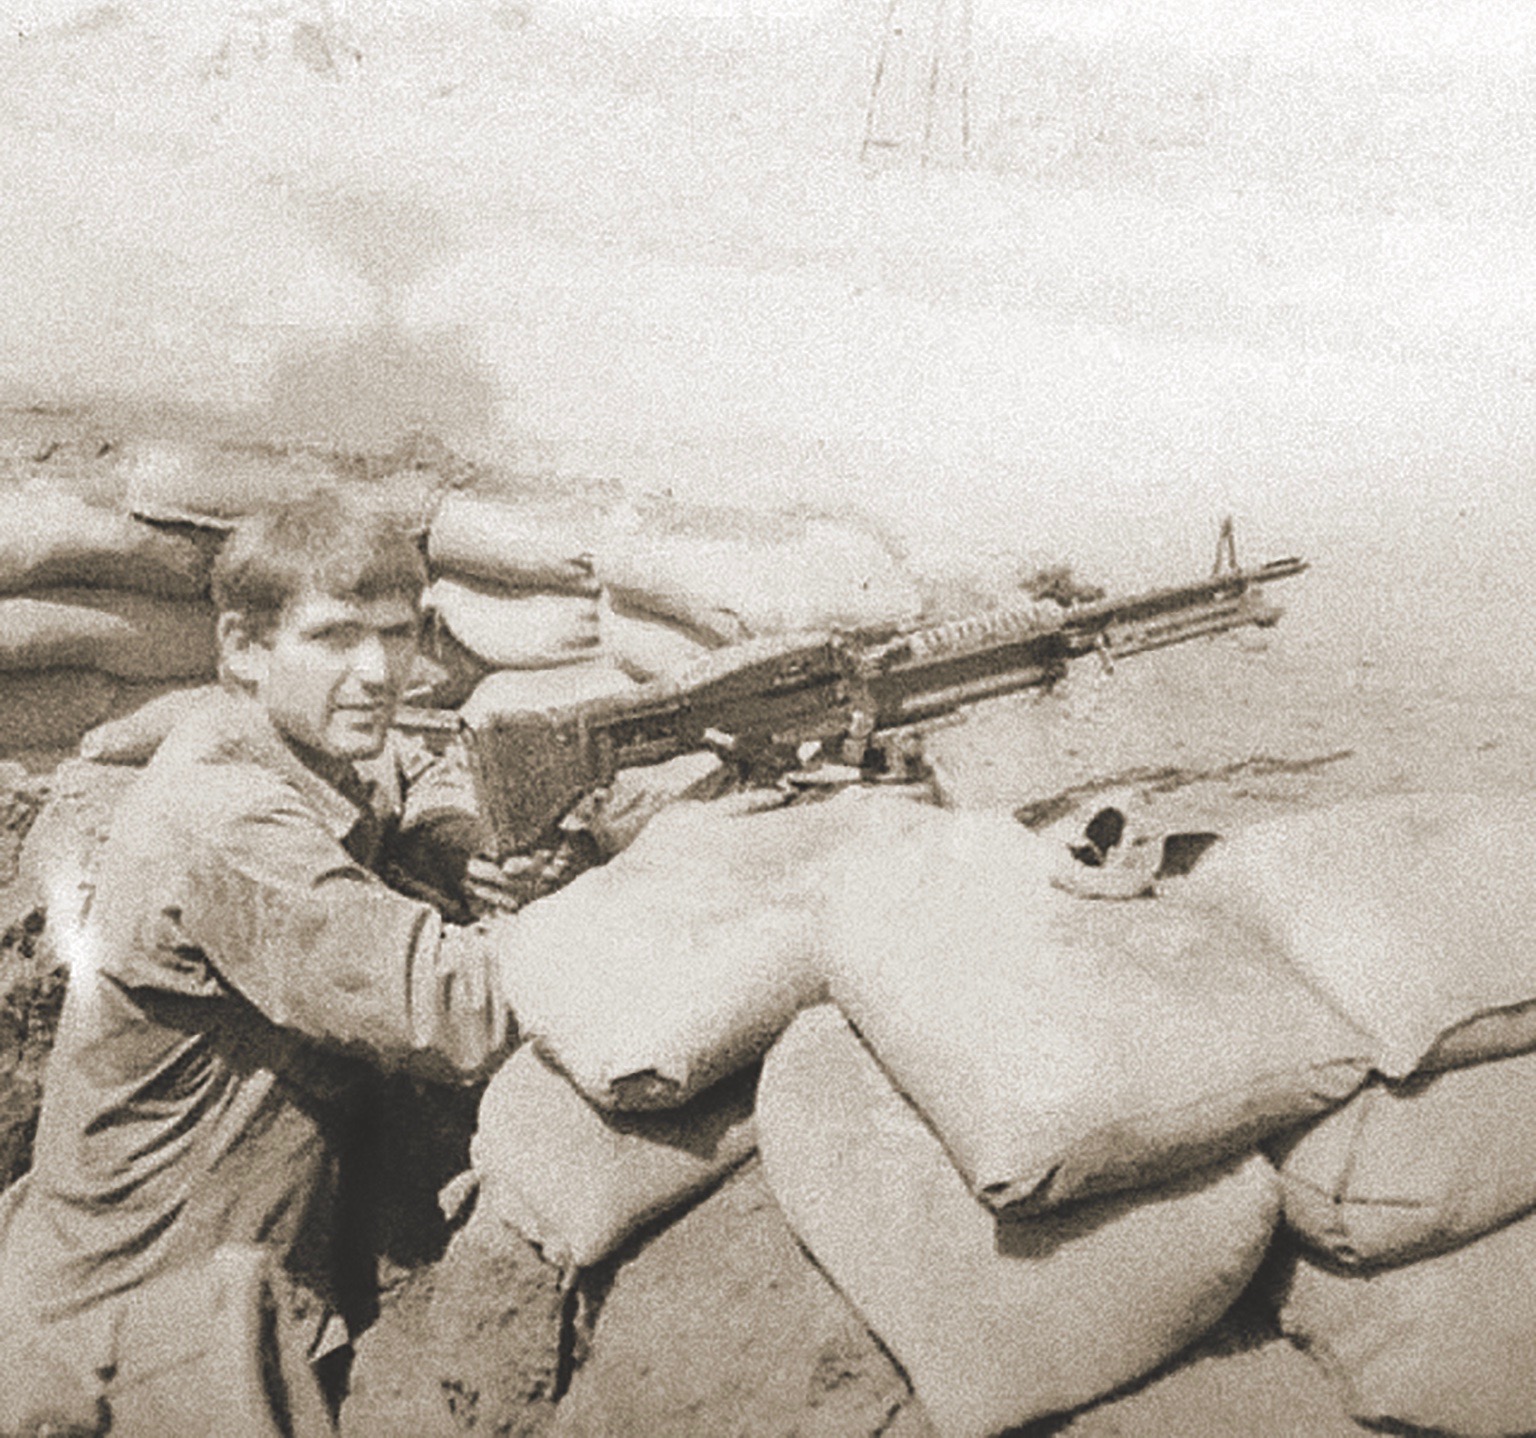 Cpl. Tommy Hatcher, of the 9th Marine Regiment’s 1st Platoon, Charlie Company, was moving with his unit to aid Alpha Company on Hill 600 when an enemy soldier threw a grenade that landed at his feet. (Talmadge “Tommy” Hatcher)